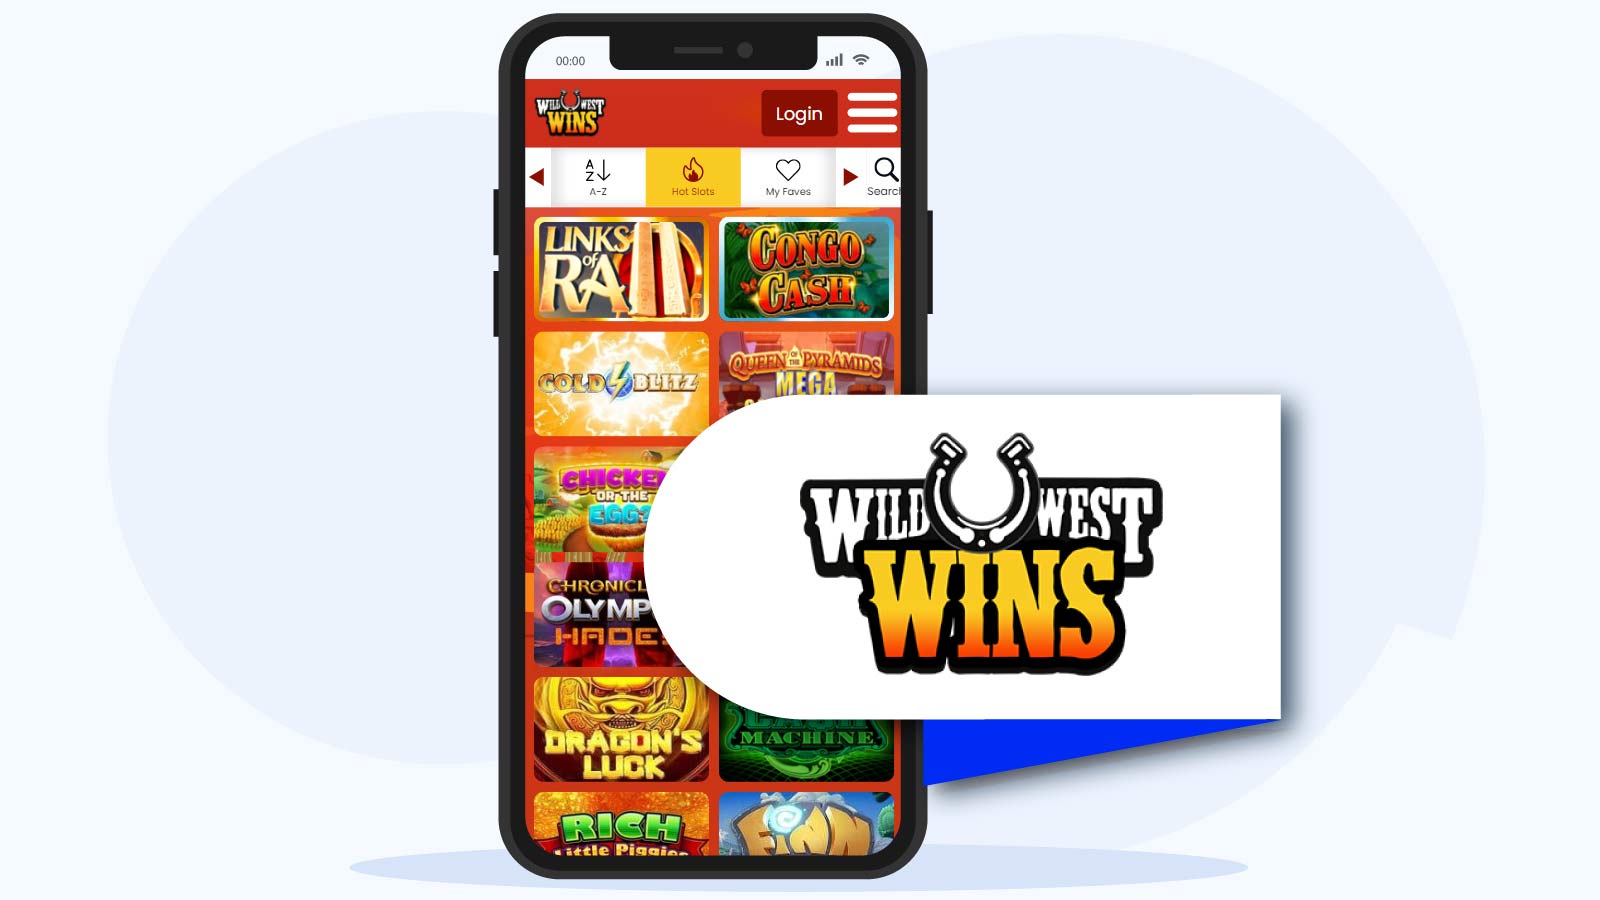 20 Free Spins Mobile Verification at Wild West Wins